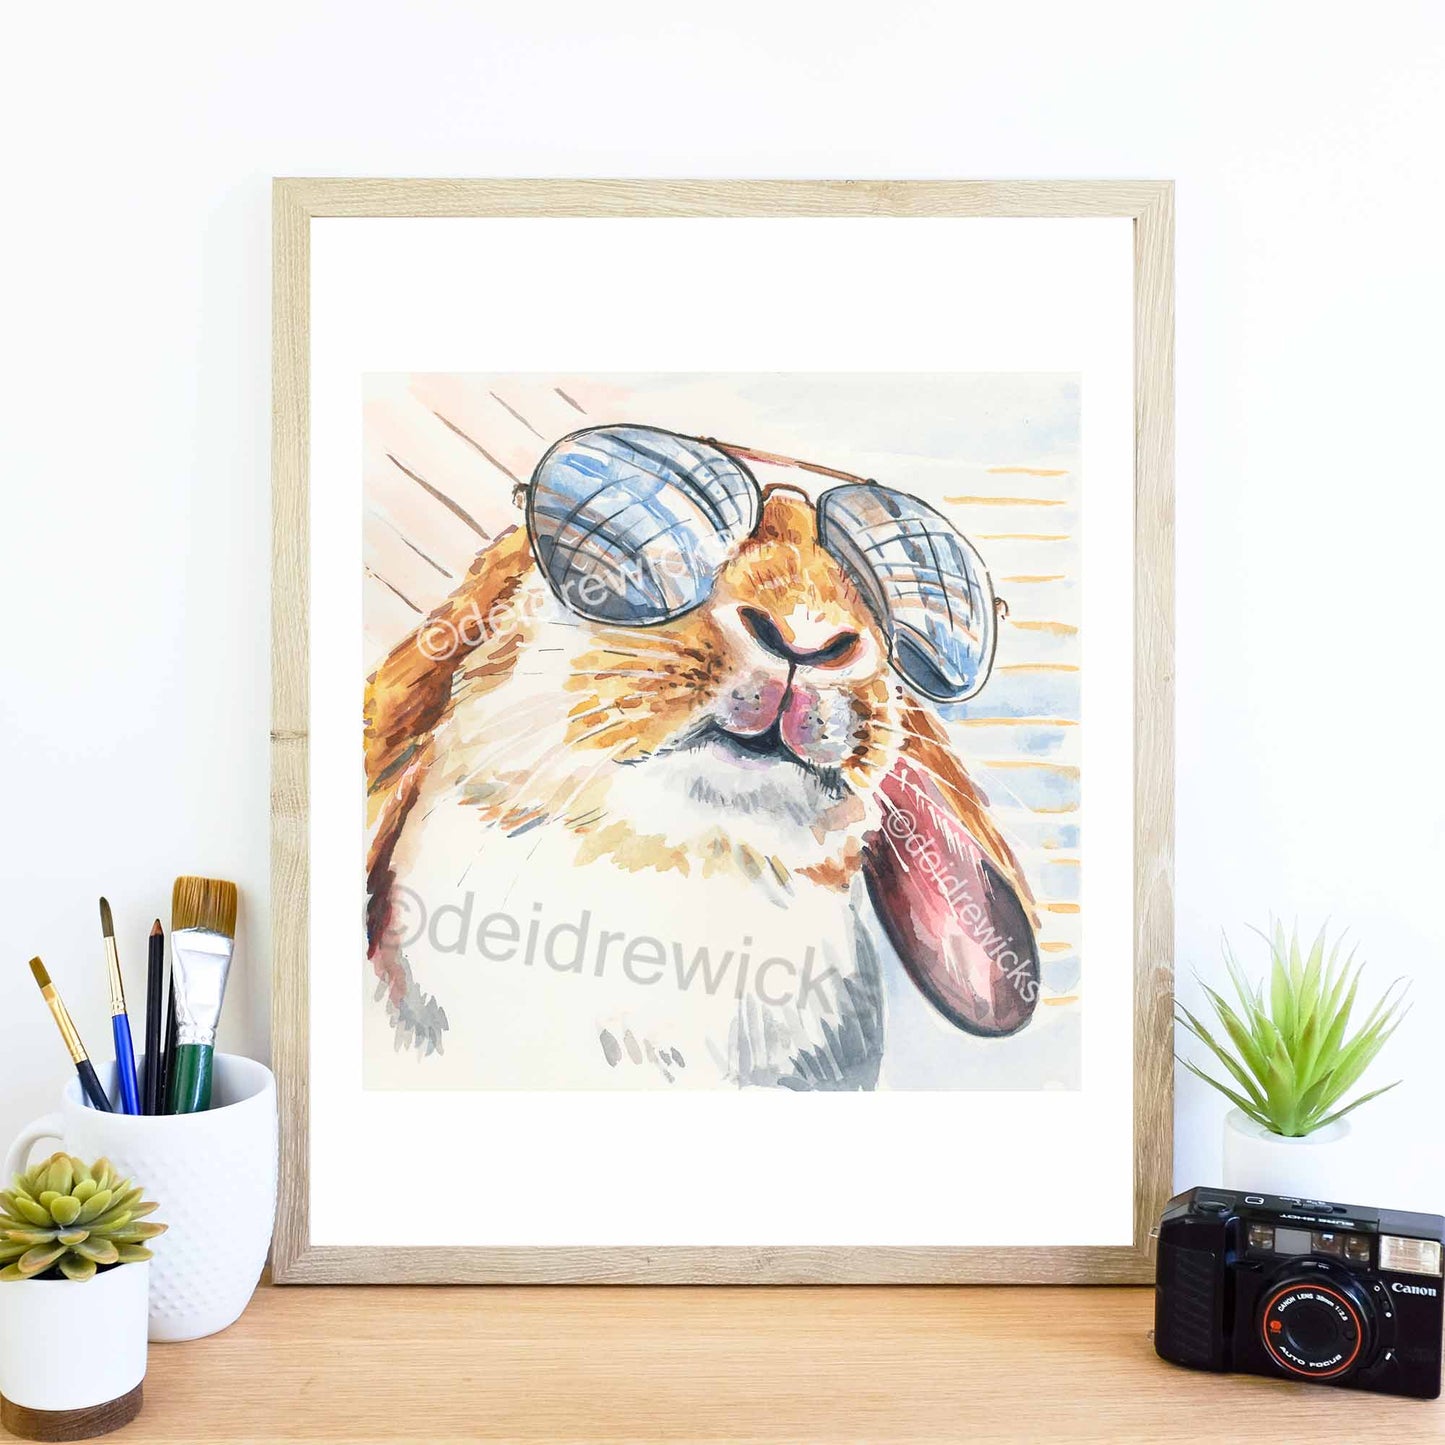 Example of how to frame a rabbit watercolour painting by Deidre Wicks